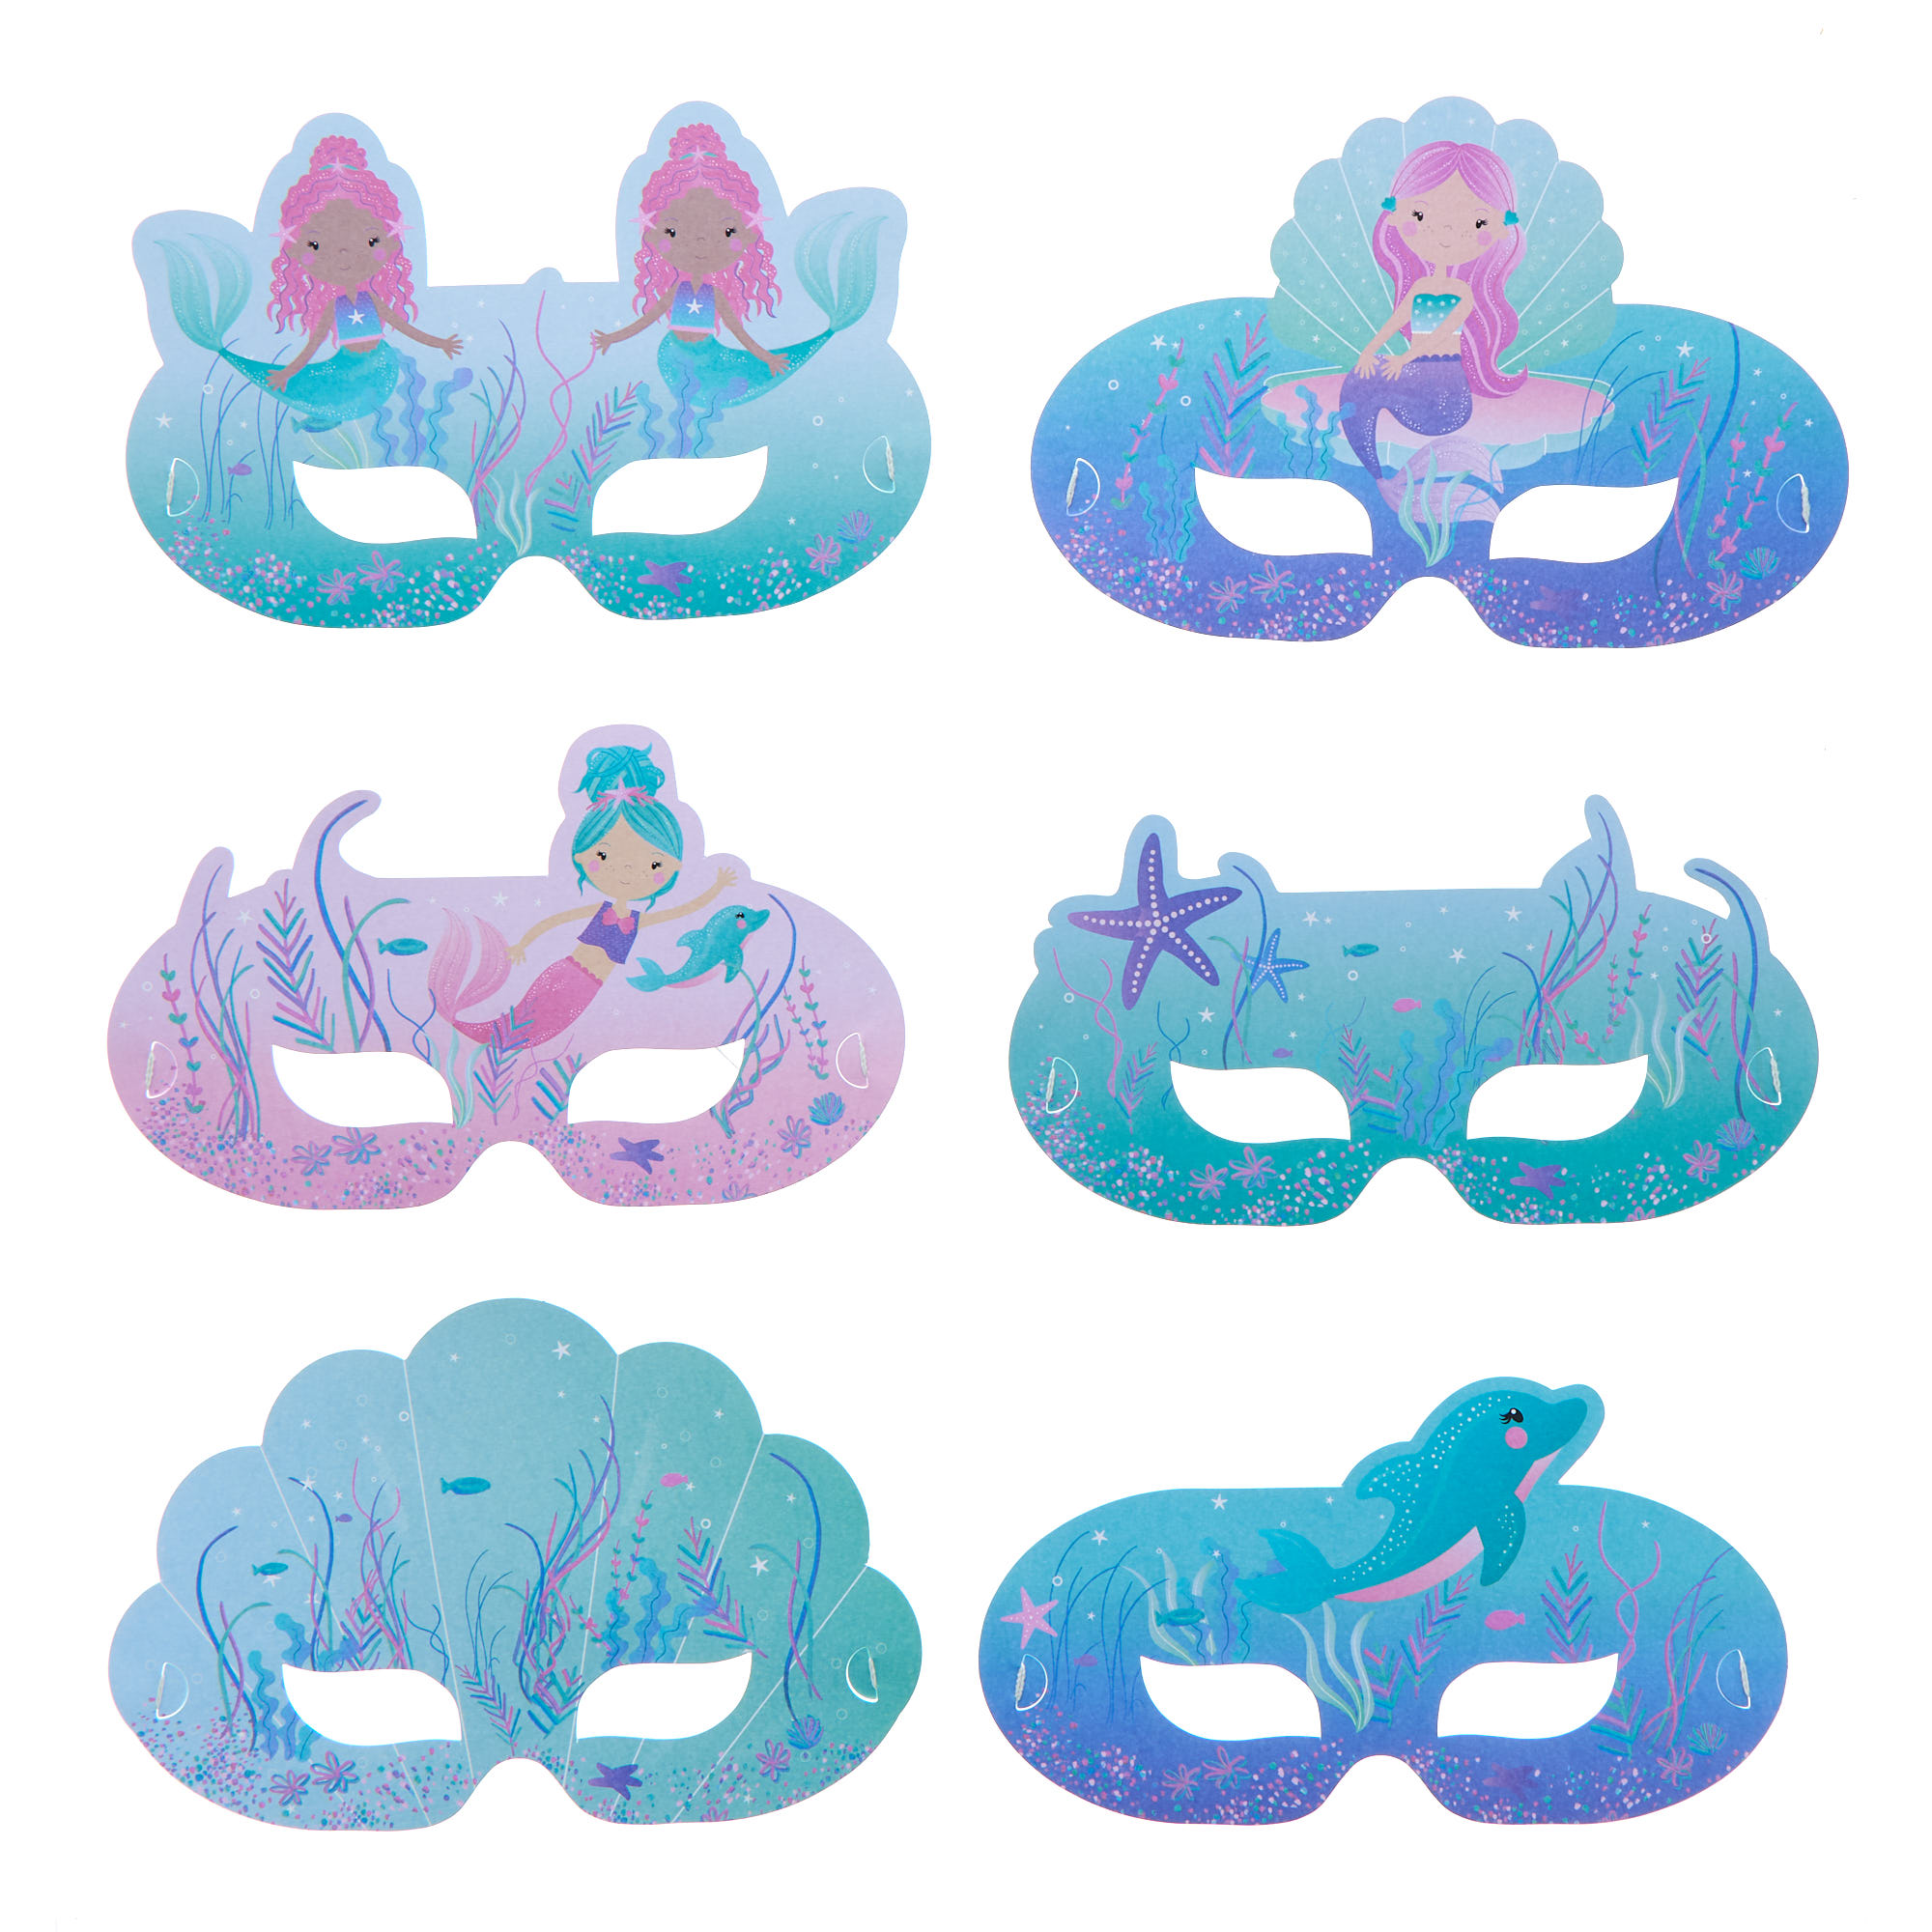 Children's Mermaid Party Masks - Pack of 6